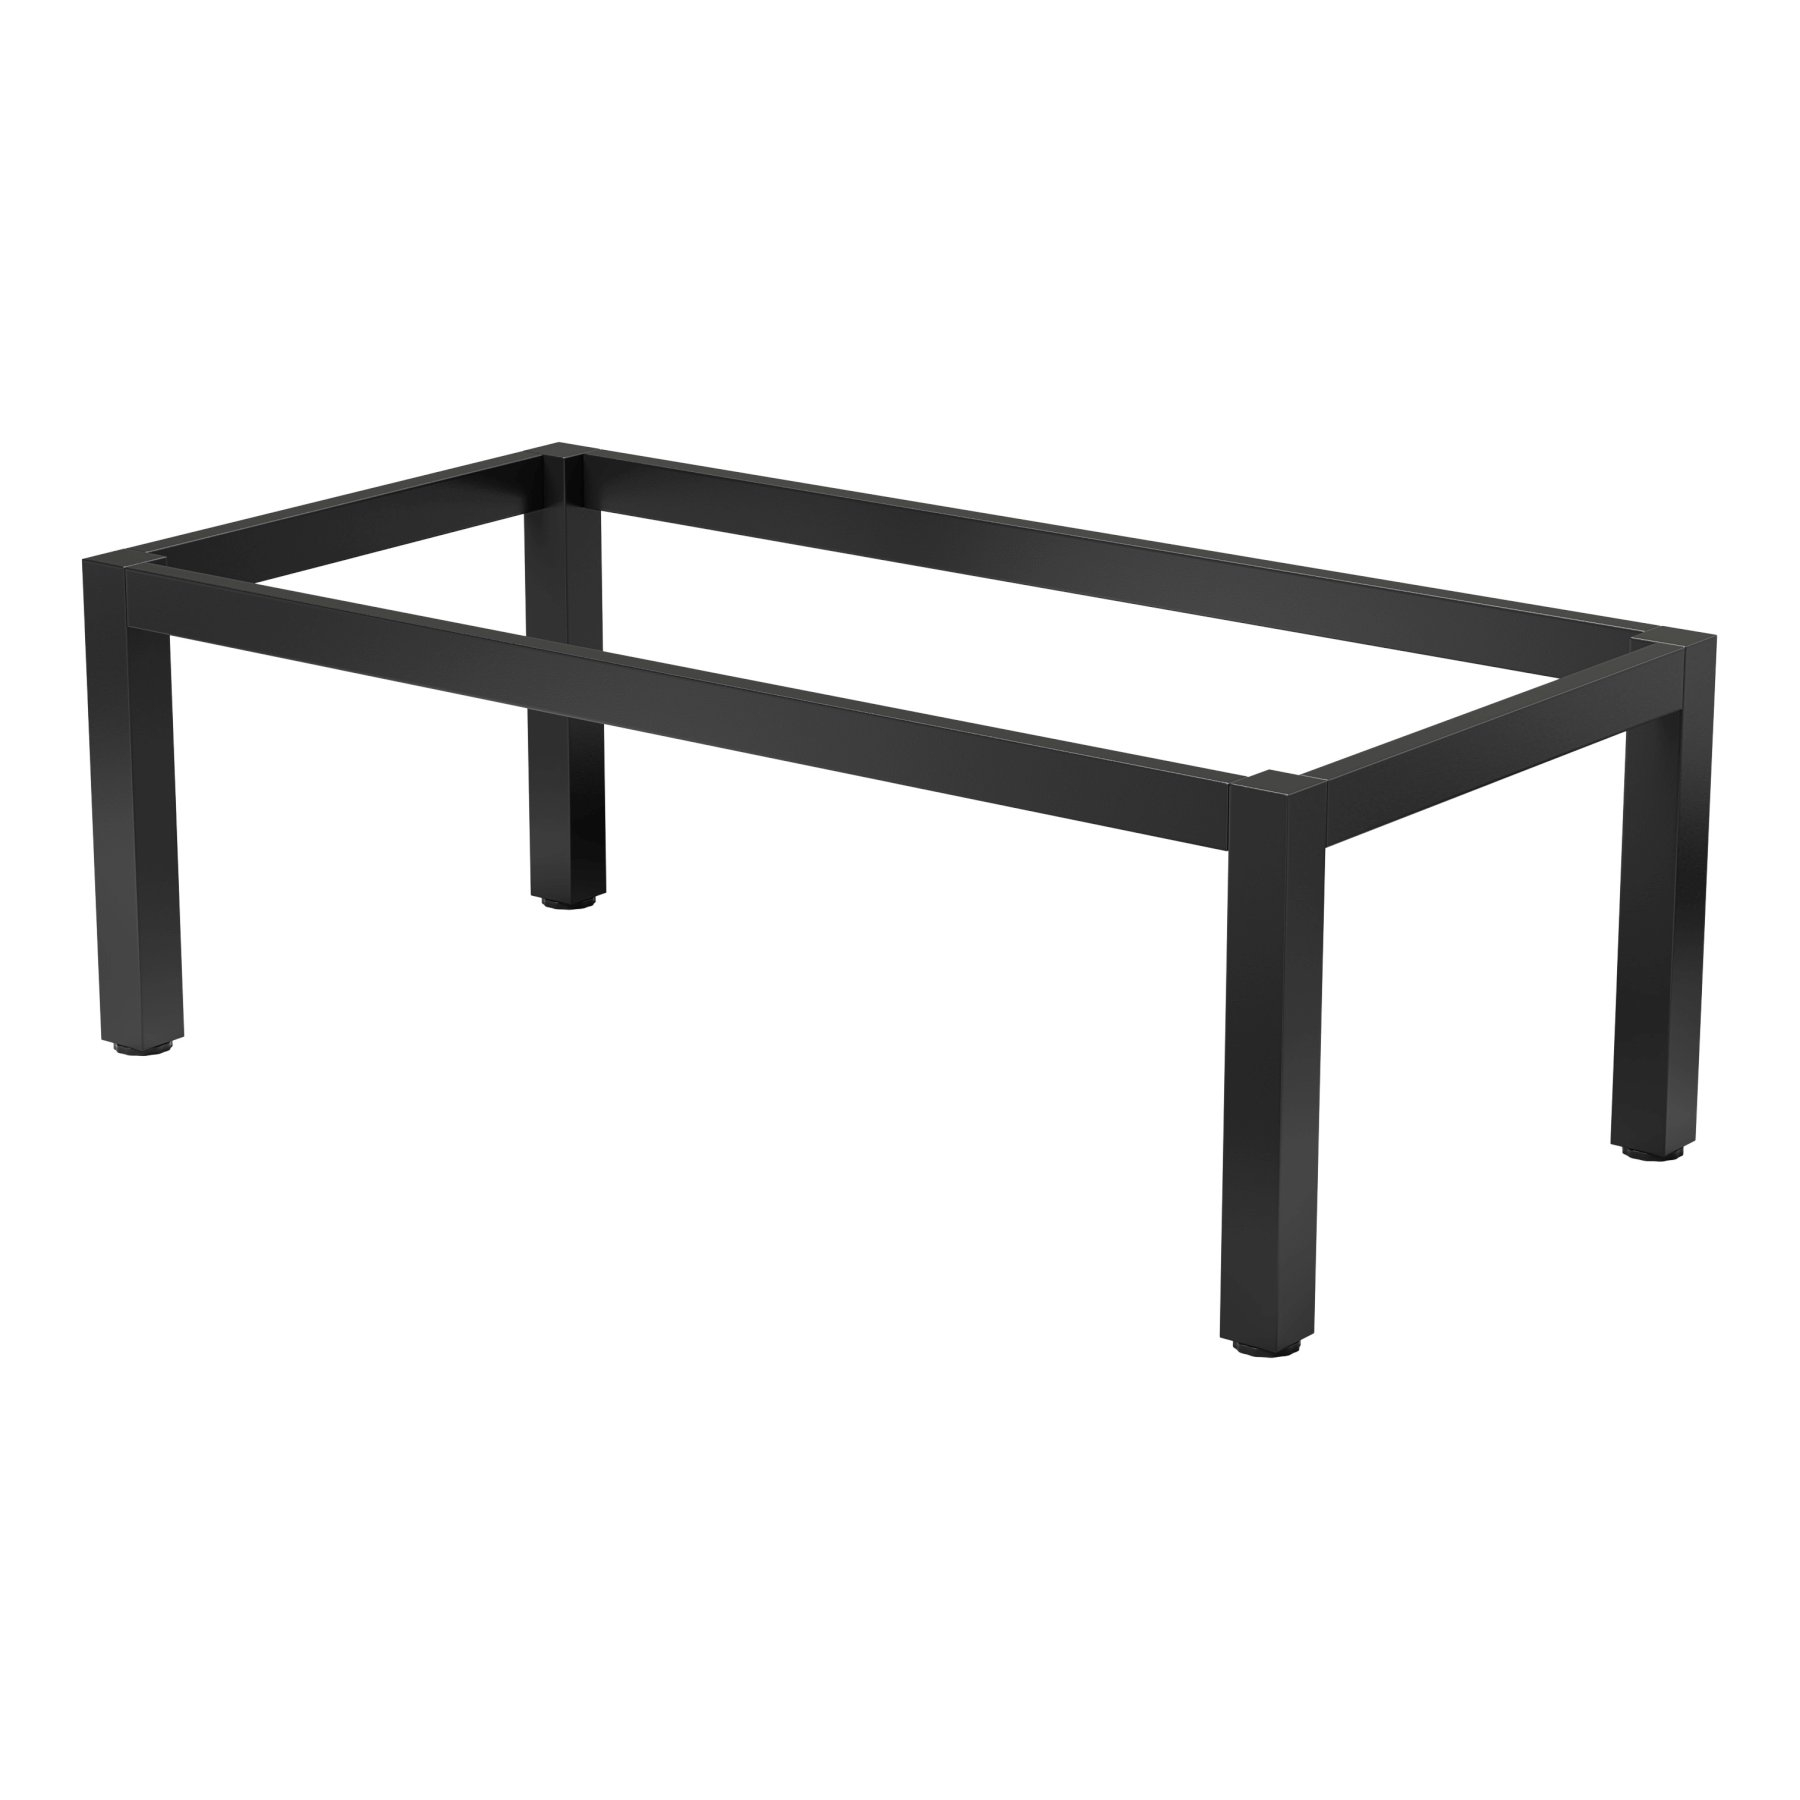 Cubit Coffee Table Frame Ams Furniture intended for size 1800 X 1800